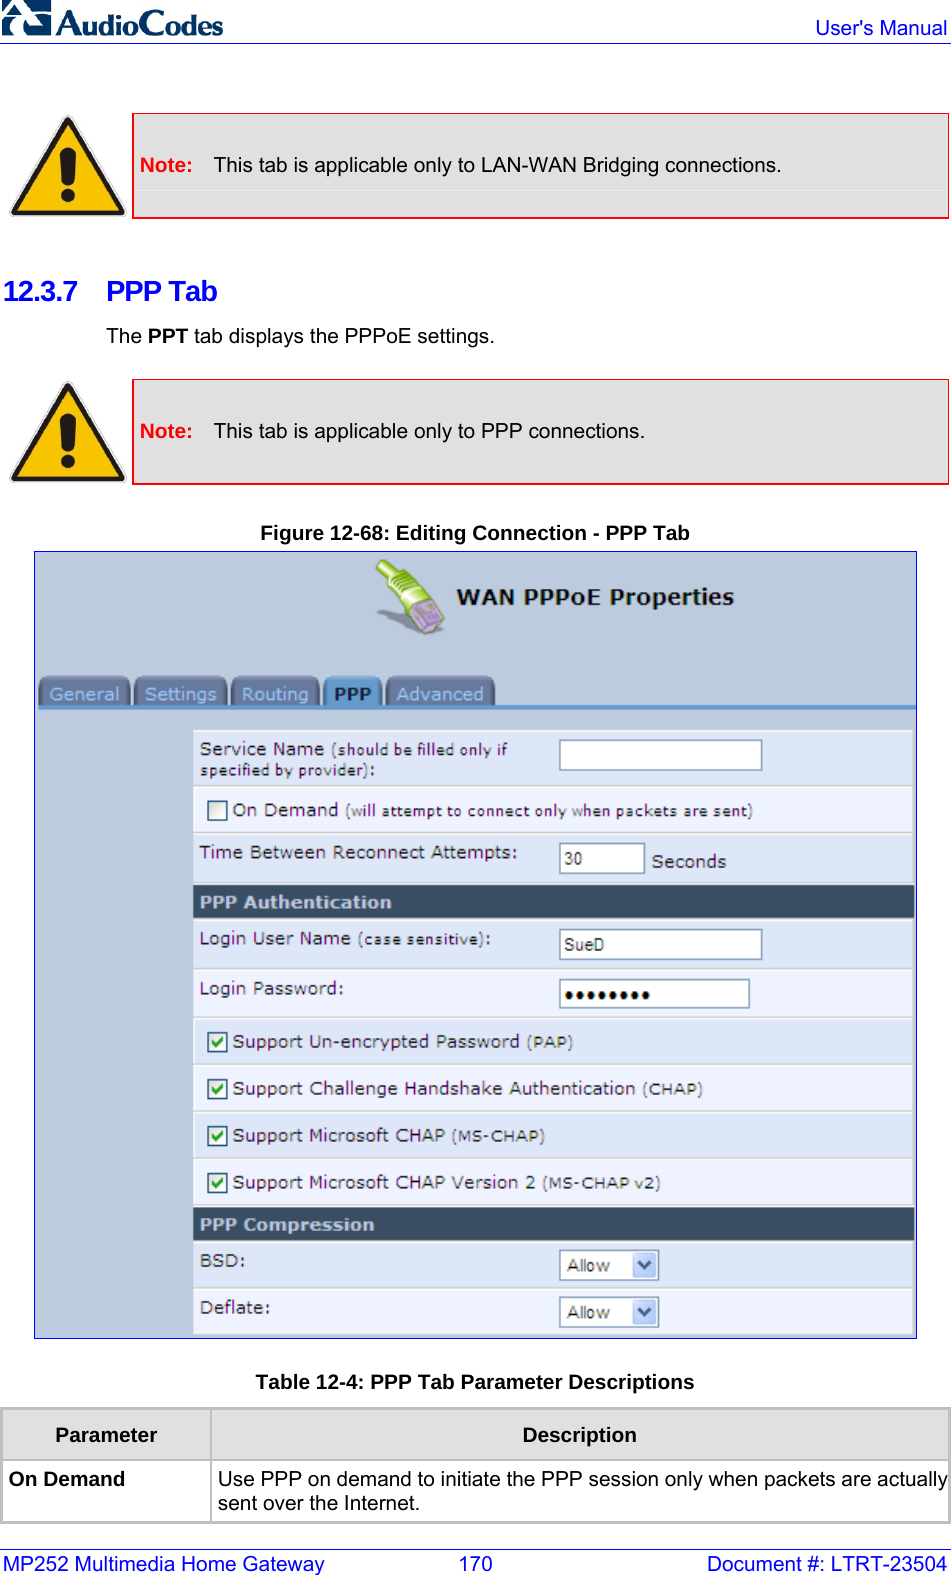 MP252 Multimedia Home Gateway  170  Document #: LTRT-23504  User&apos;s Manual    Note:  This tab is applicable only to LAN-WAN Bridging connections.  12.3.7 PPP Tab The PPT tab displays the PPPoE settings.   Note:  This tab is applicable only to PPP connections.  Figure 12-68: Editing Connection - PPP Tab  Table 12-4: PPP Tab Parameter Descriptions Parameter  Description On Demand  Use PPP on demand to initiate the PPP session only when packets are actuallysent over the Internet. 